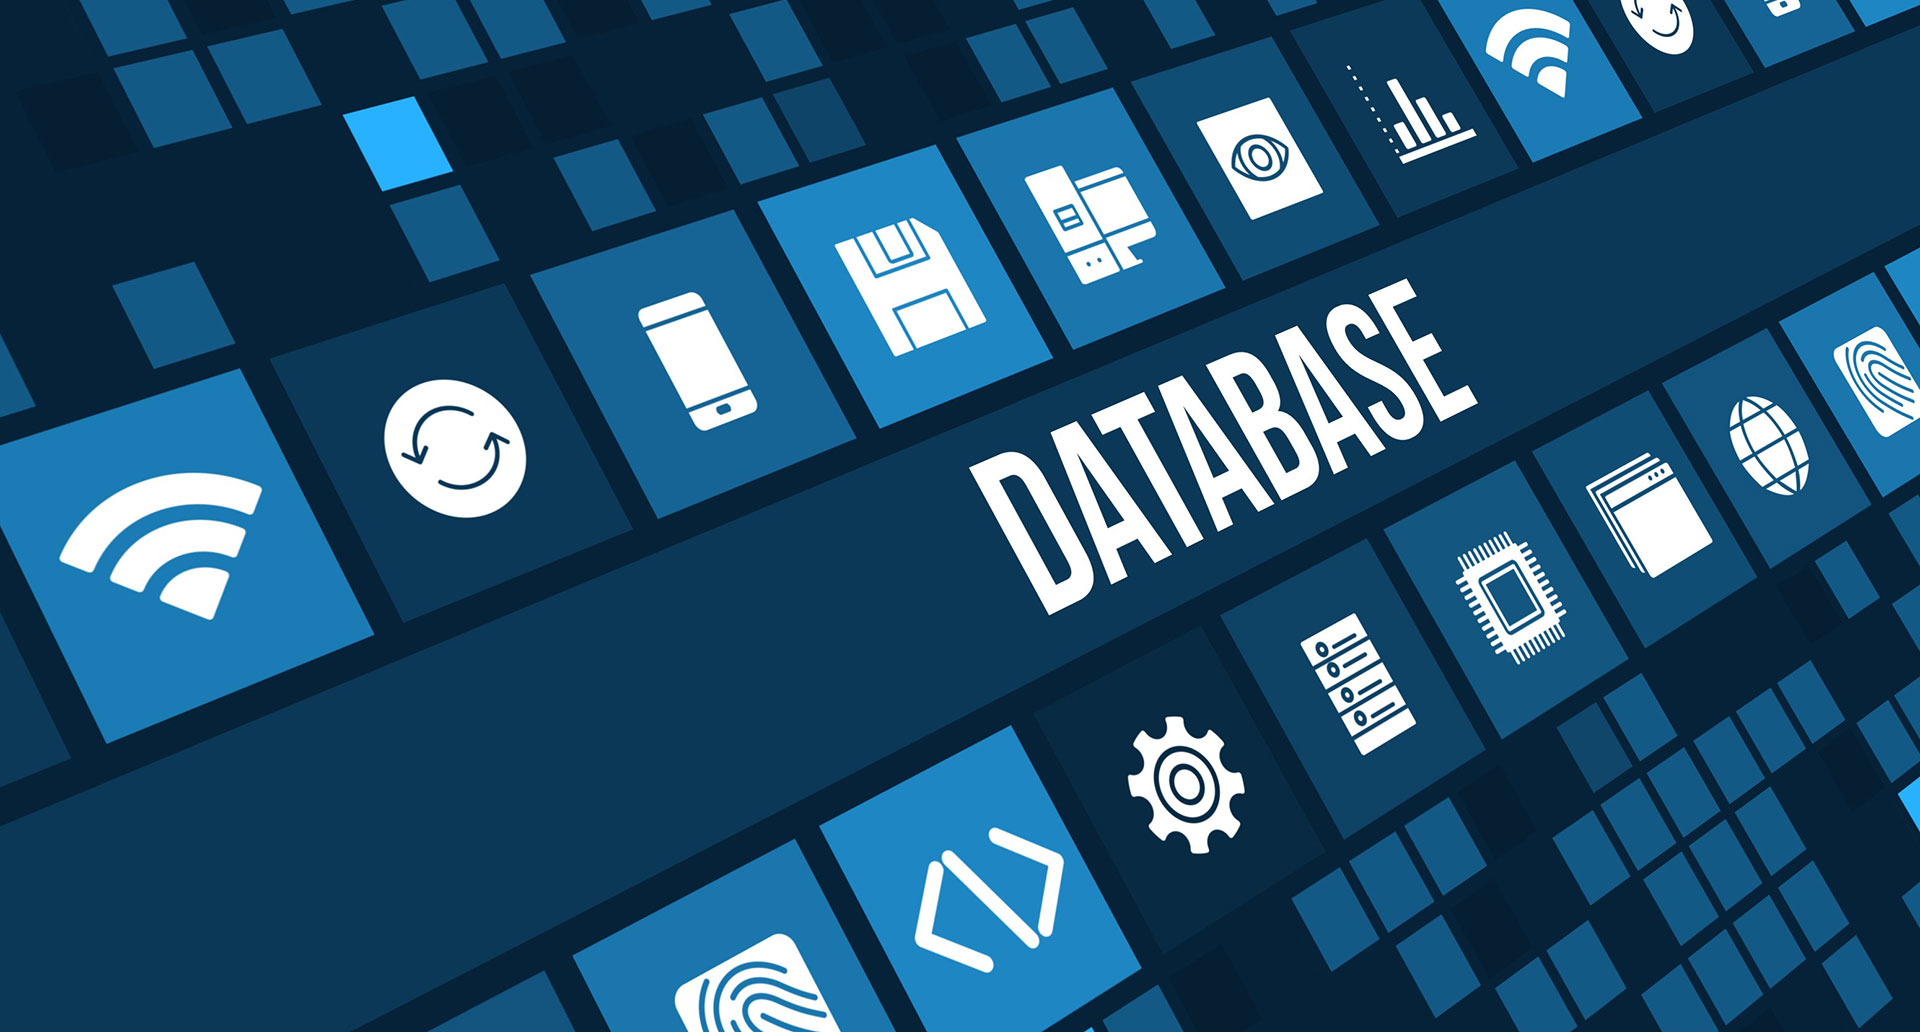 Database Service Providers: What To Look For and Where To Find The Best Ones